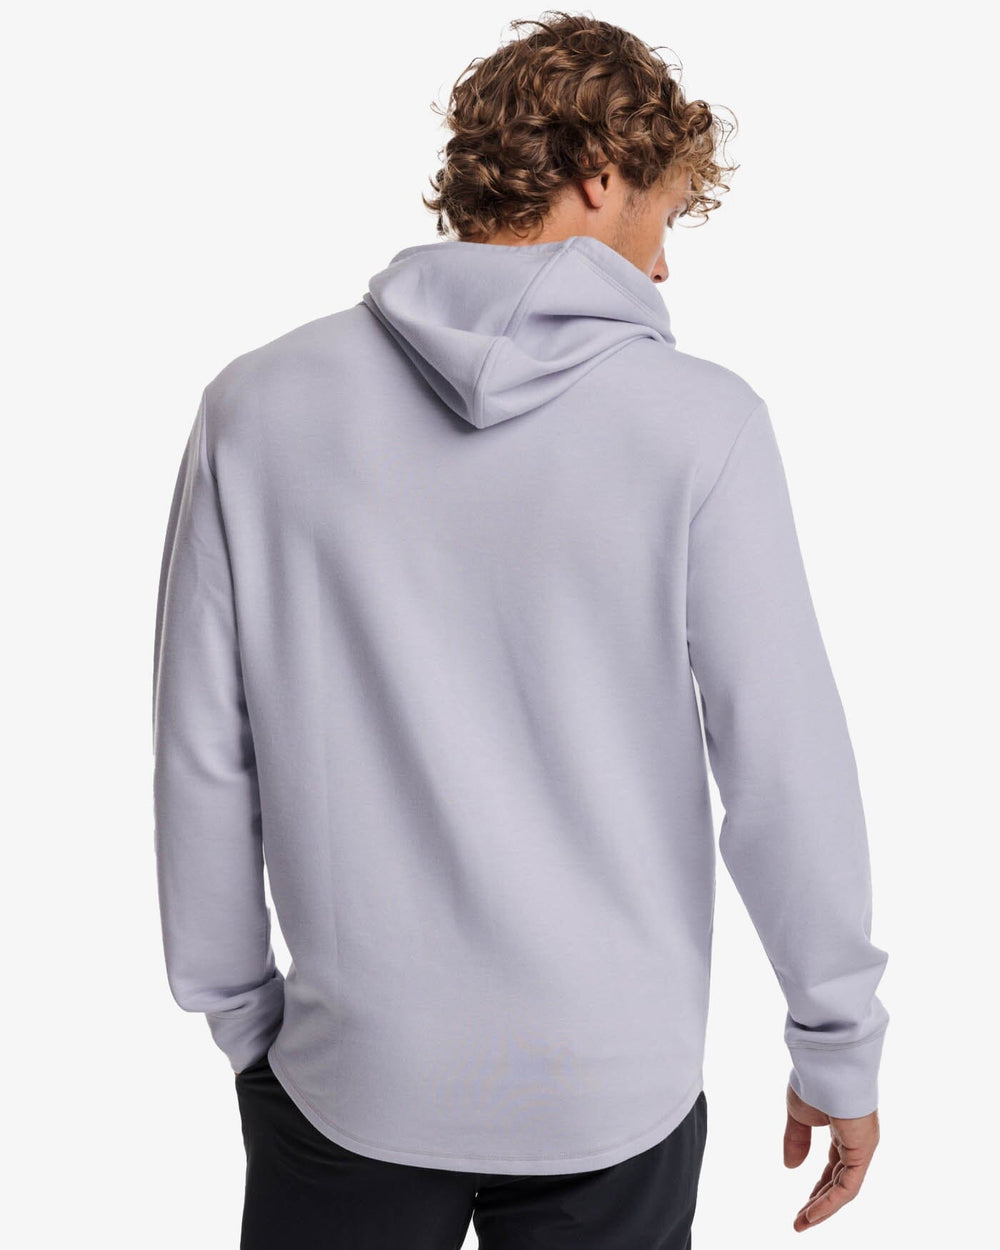 The back view of the Southern Tide Stratford Heather Interlock Hoodie by Southern Tide - Heather Platinum Grey